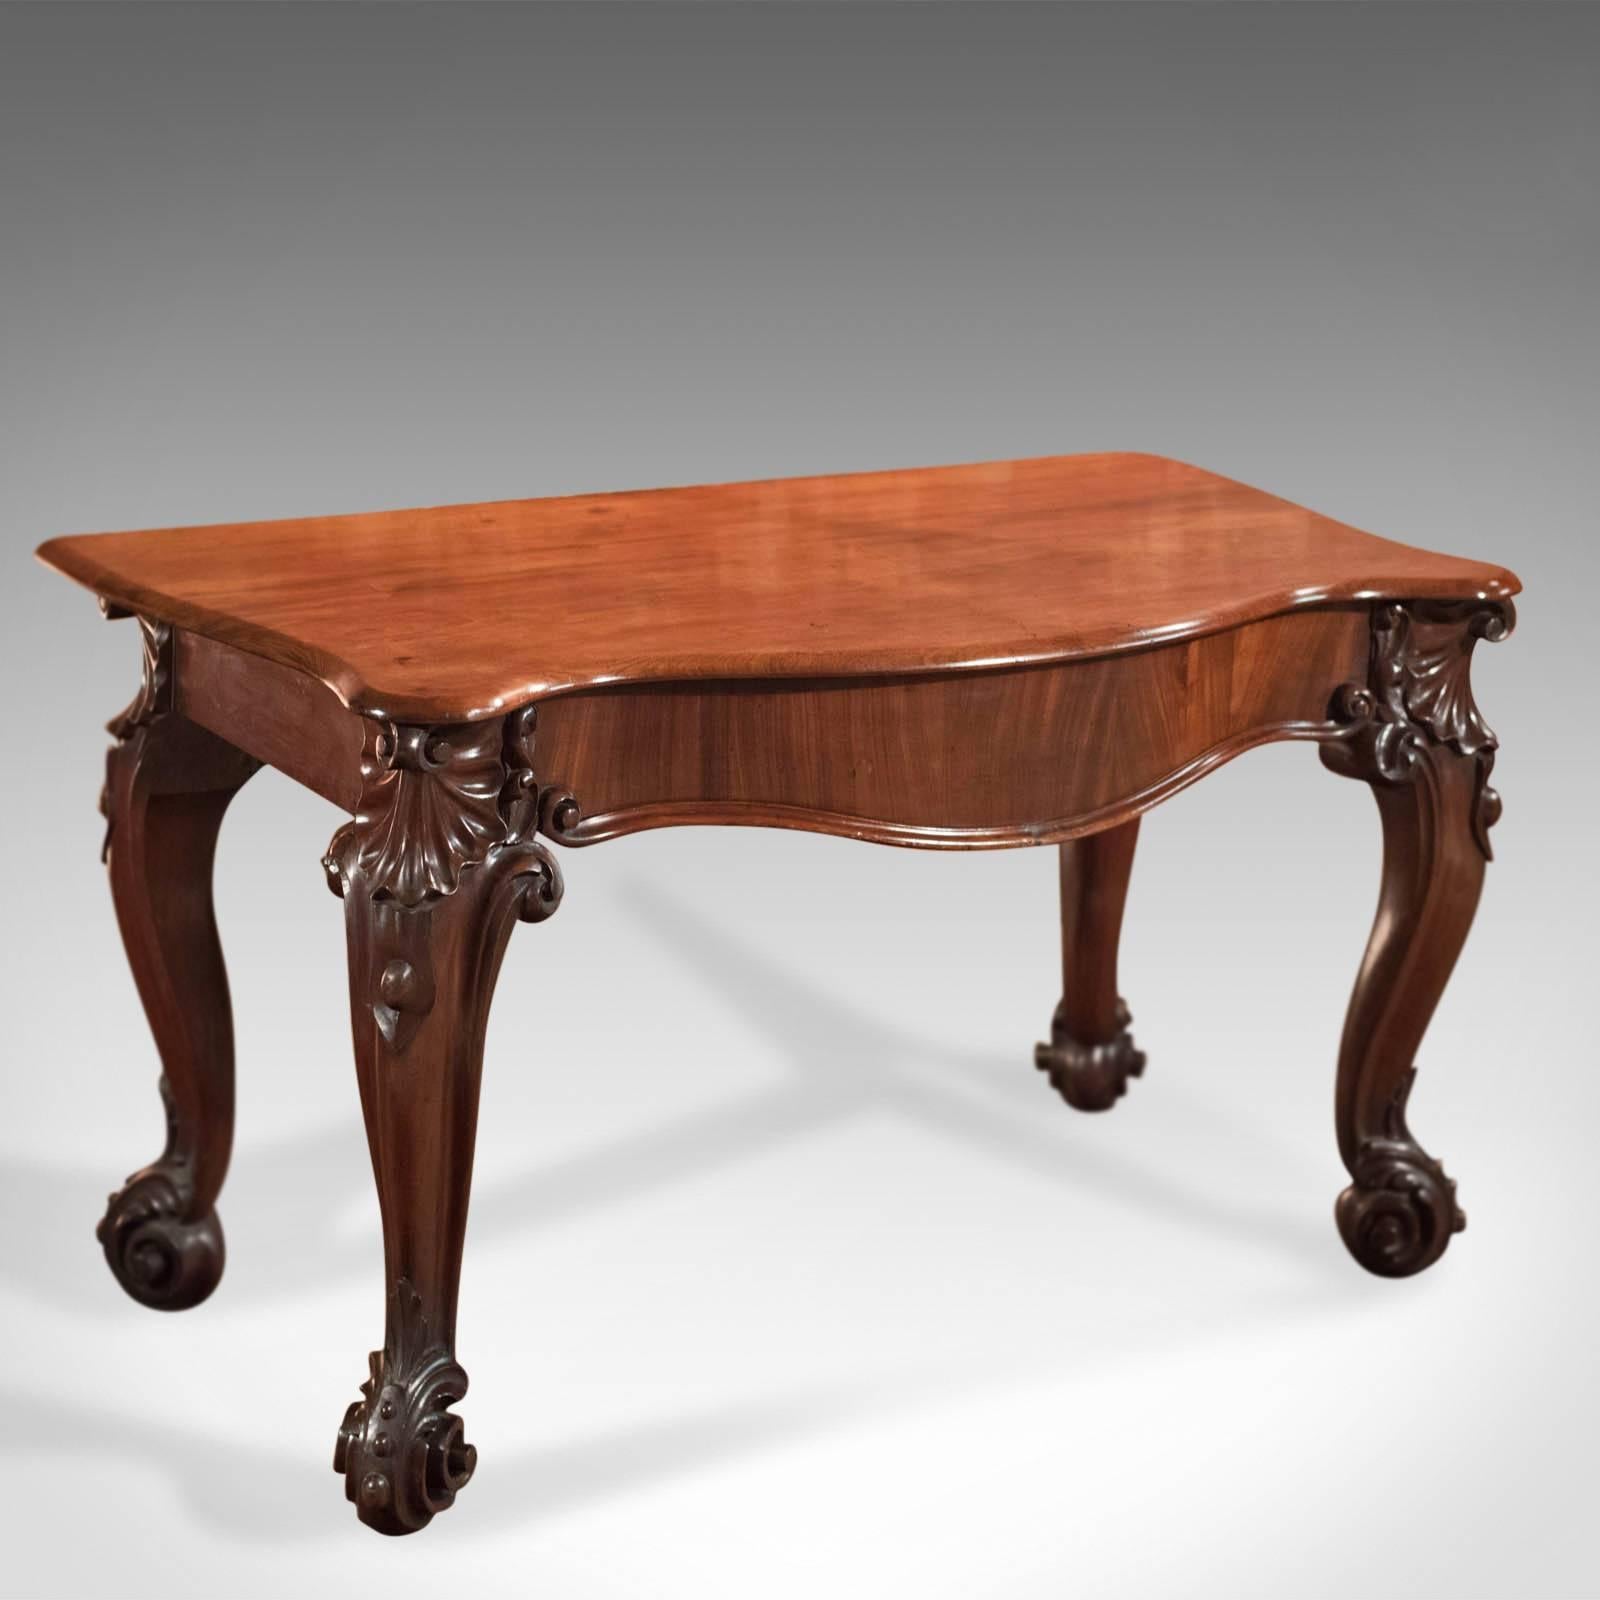 This is an antique console table, an English, Victorian mahogany serving table dating to the mid-Victorian period circa 1860.

Elaborate and attractive console or serving table 
Formerly a dining table displaying Victorian excess
First class